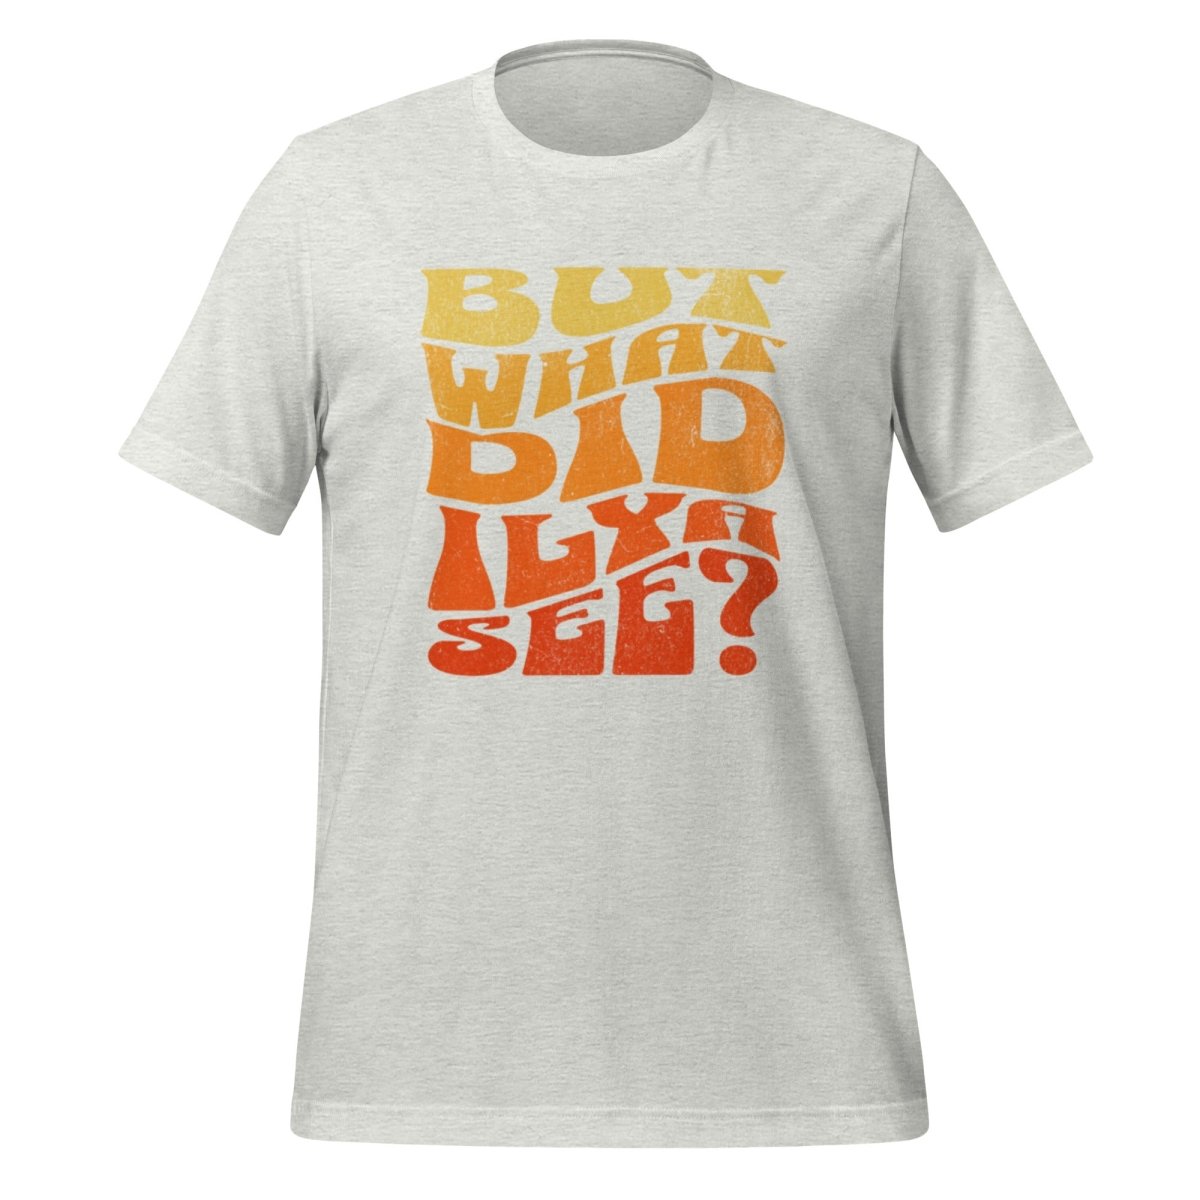 BUT WHAT DID ILYA SEE? T - Shirt (unisex) - Ash - AI Store